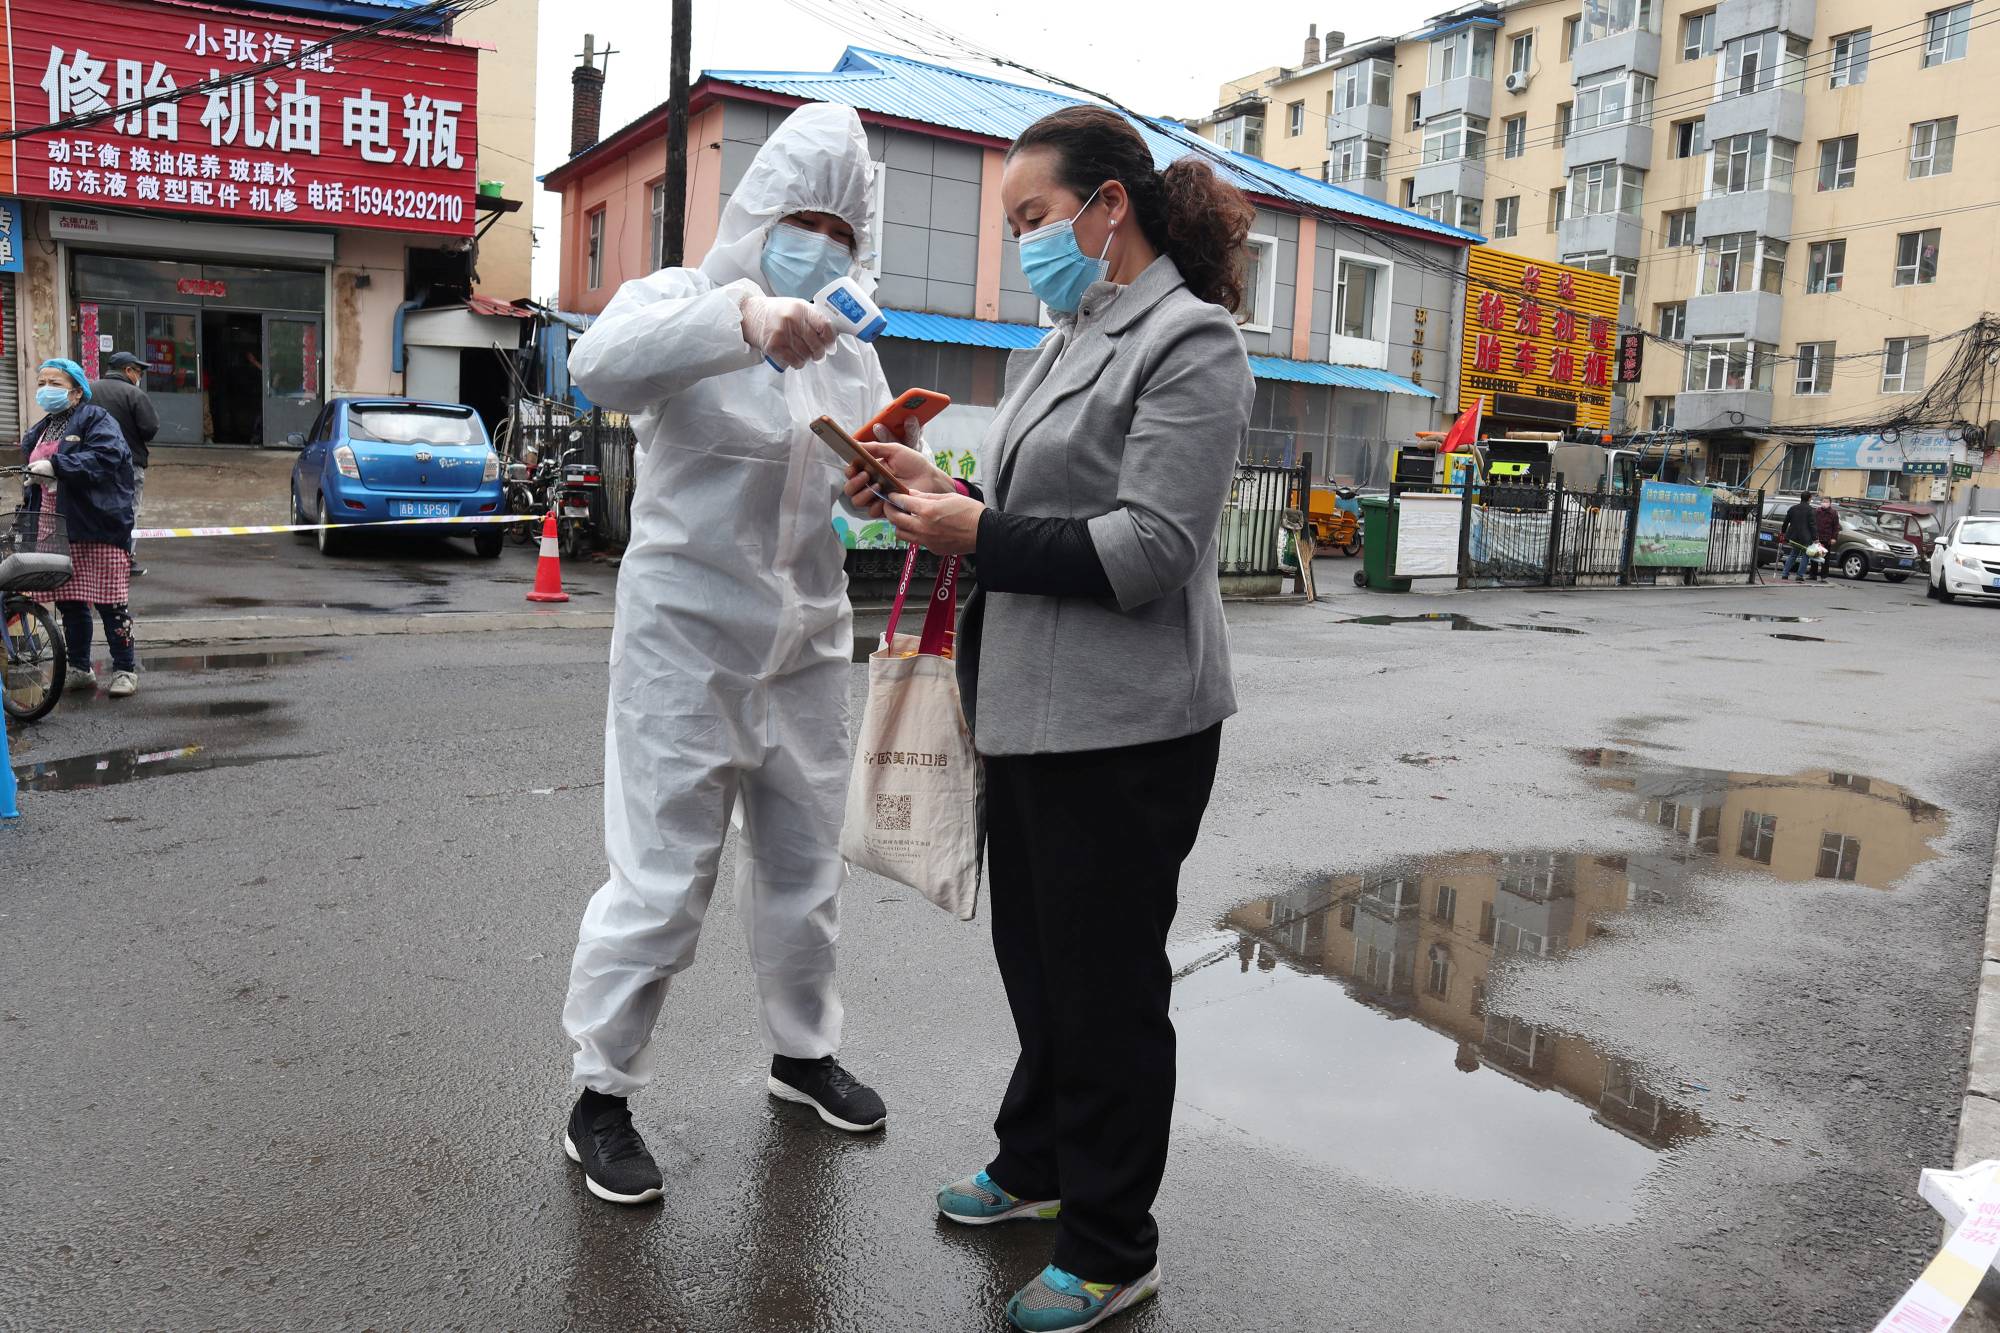 A worker in protective suit takes the body temperature measurement of a woman following the coronavirus disease outbreak in Jilin, in China's Jilin province, on Sunday.  | CNSPHOTO / VIA REUTERS